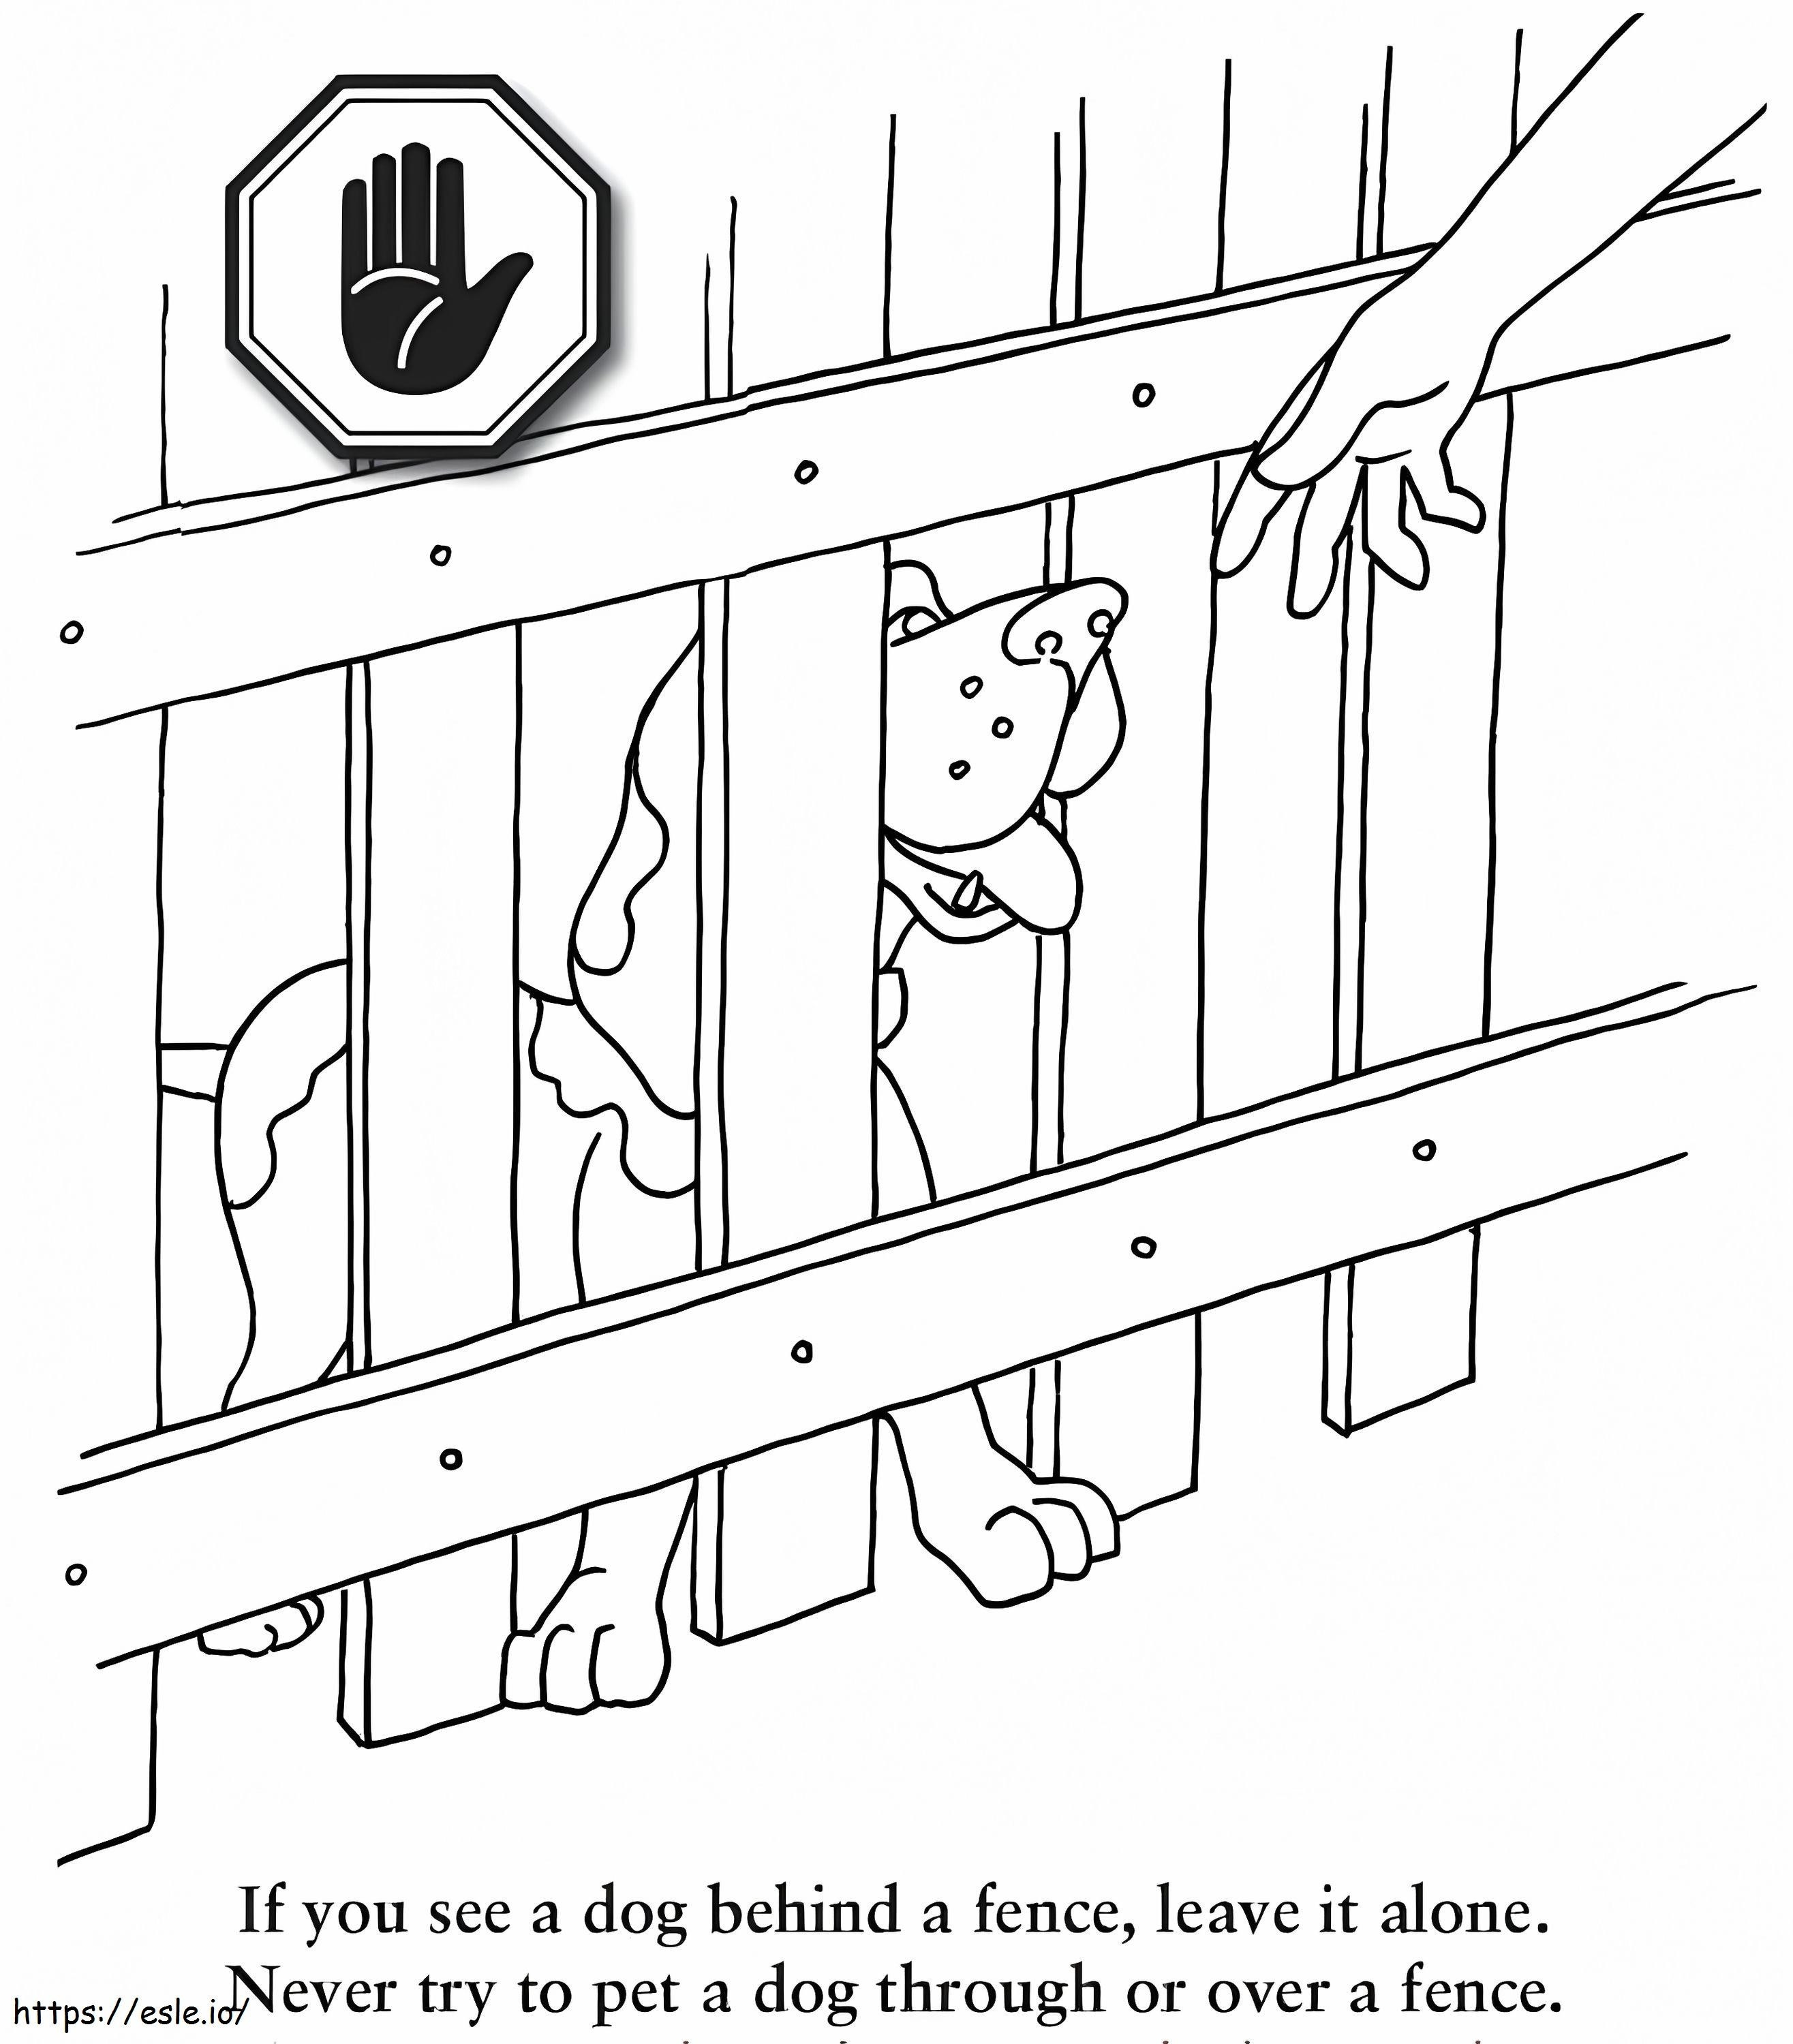 Dog Safety For Kids coloring page